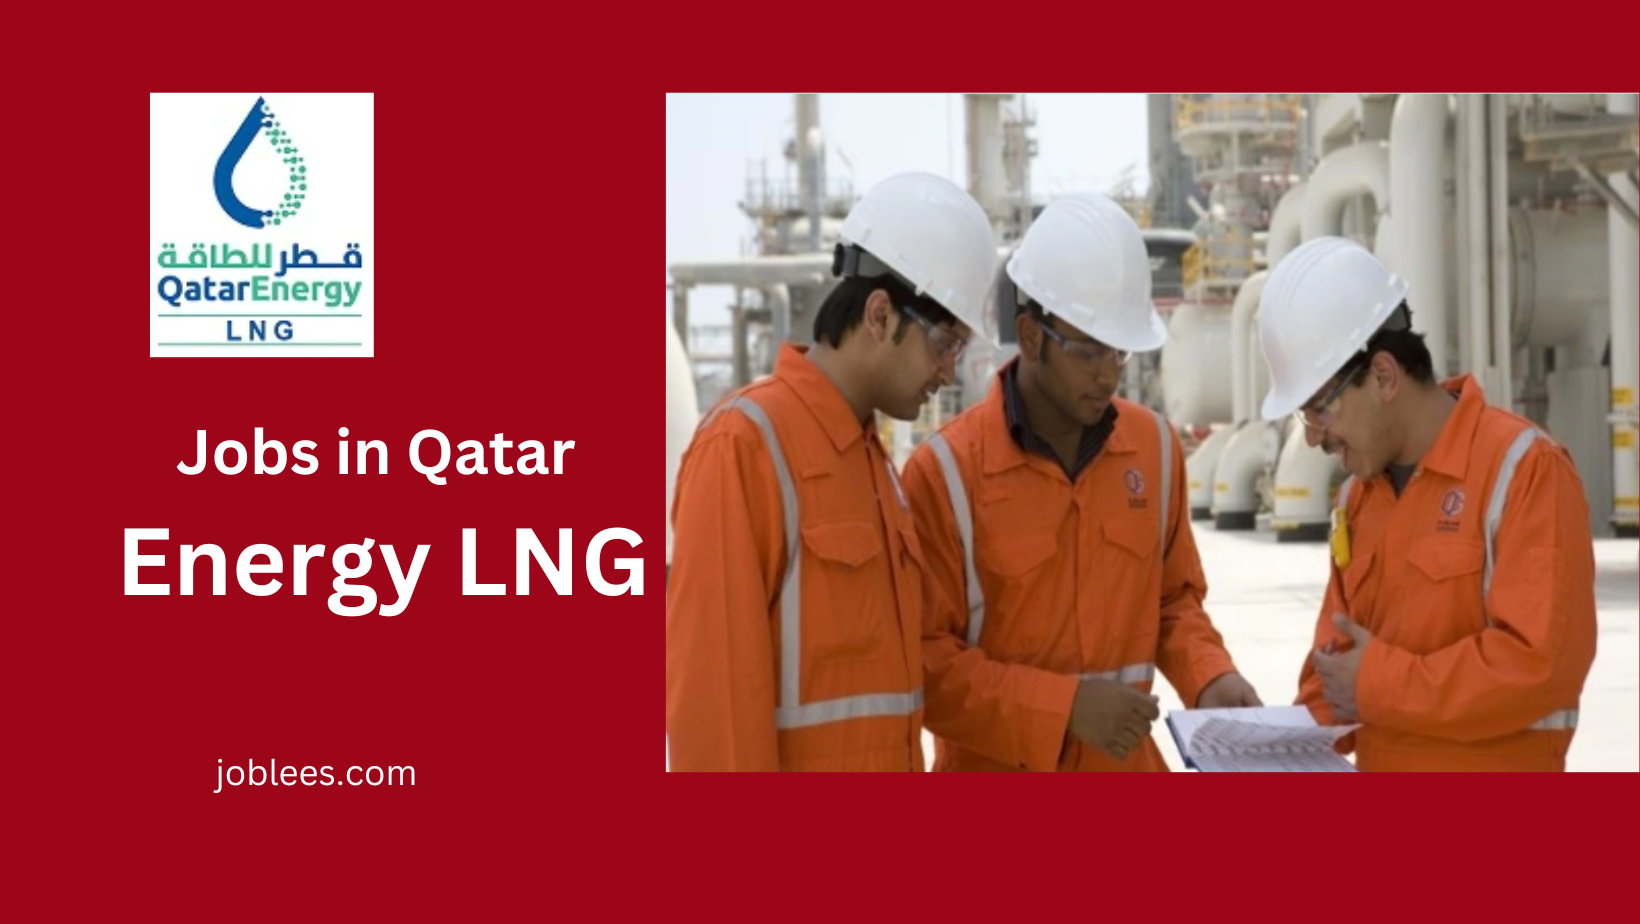 Security Sub Officer Jobs in Qatar Energy LNG